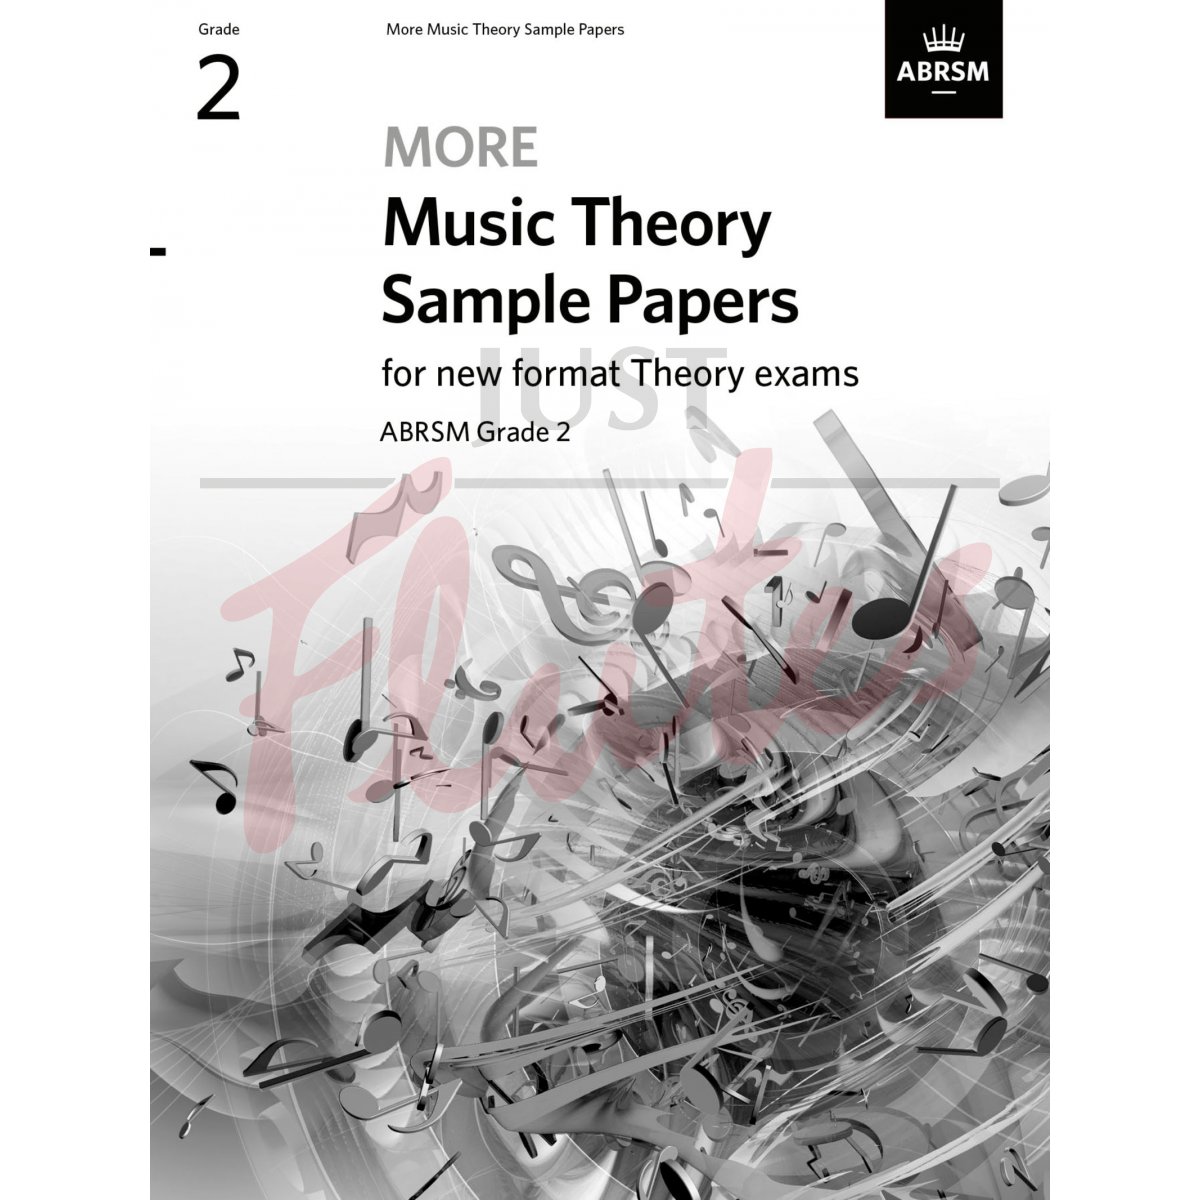 More Music Theory Sample Papers Grade 2